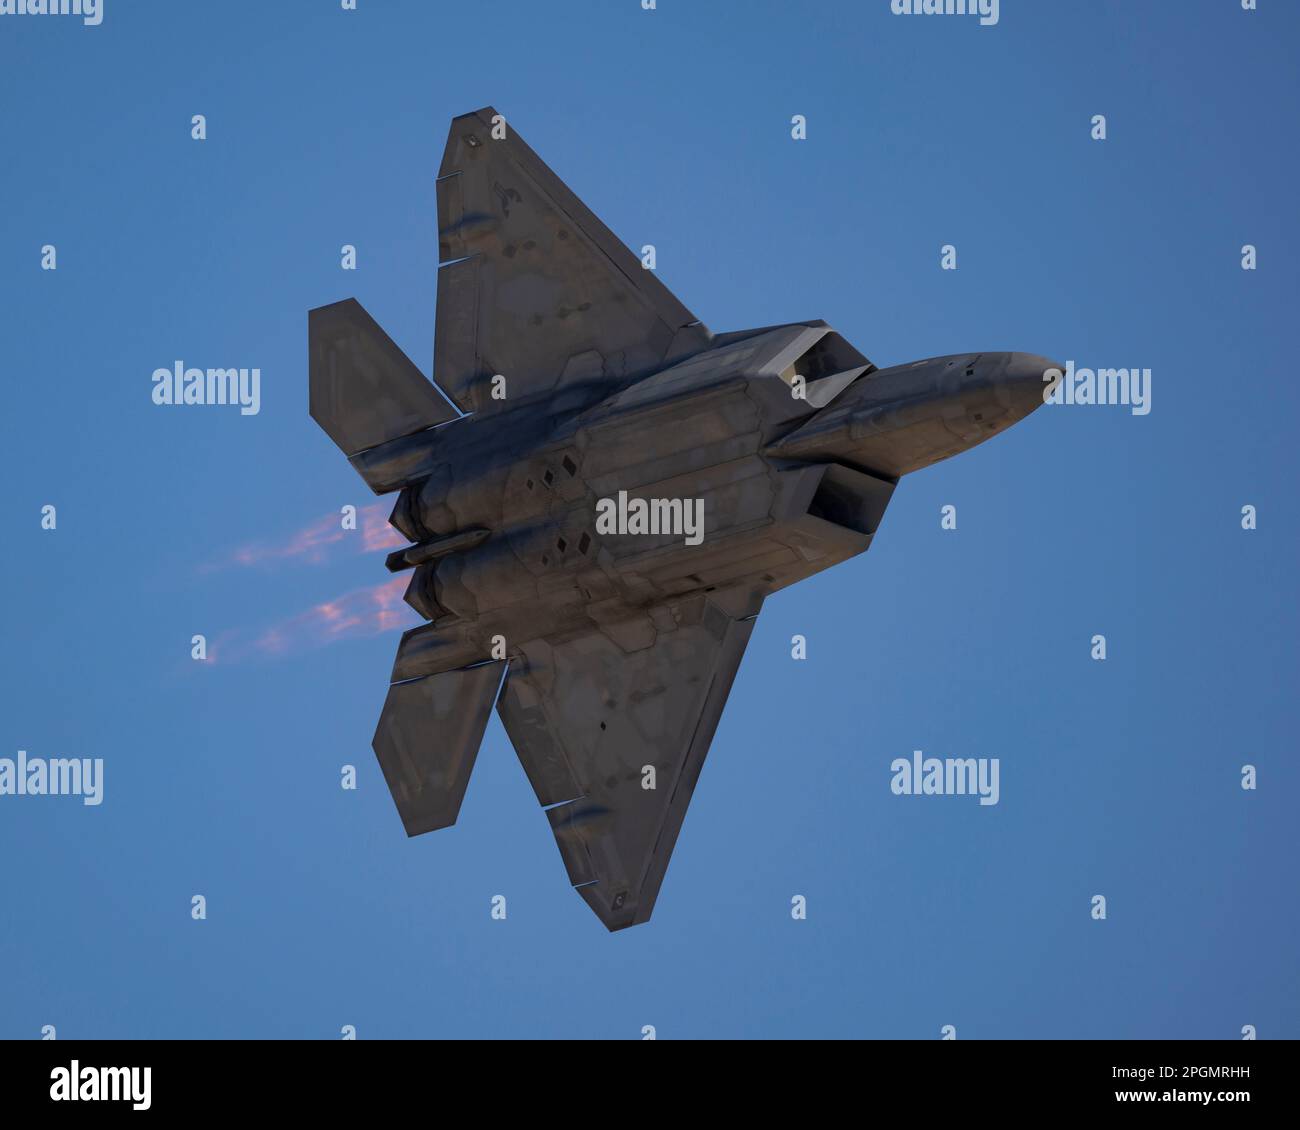 Las Vegas, NV - November 6, 2022: F-22 Fighter Jet With Afterburners During a Demonstration at the Aviation Nation Airshow at Nellis AFB. Stock Photo